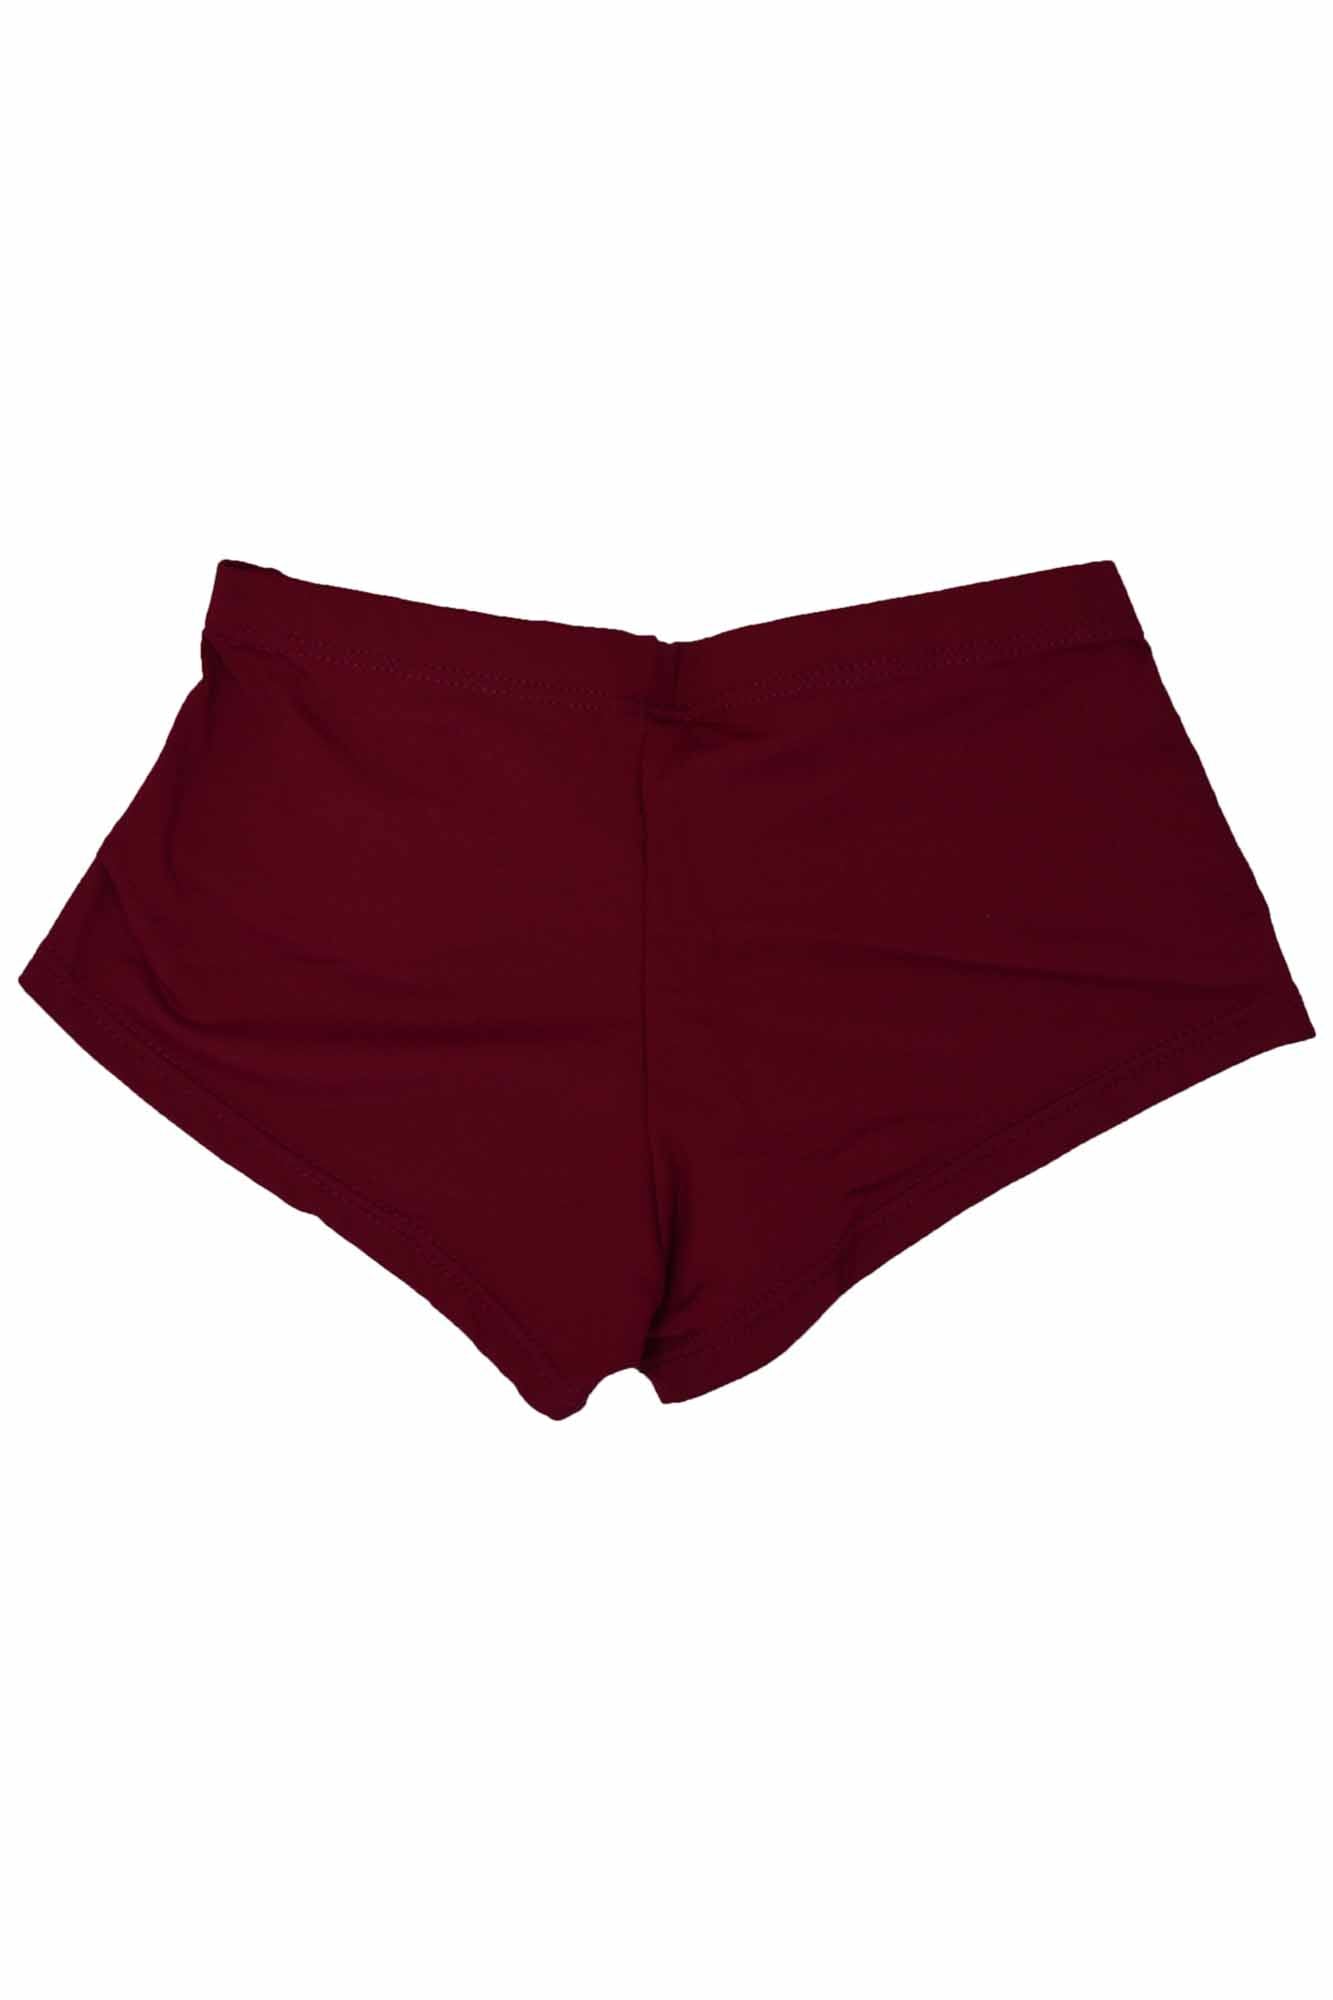 Booty Shorts - D3586